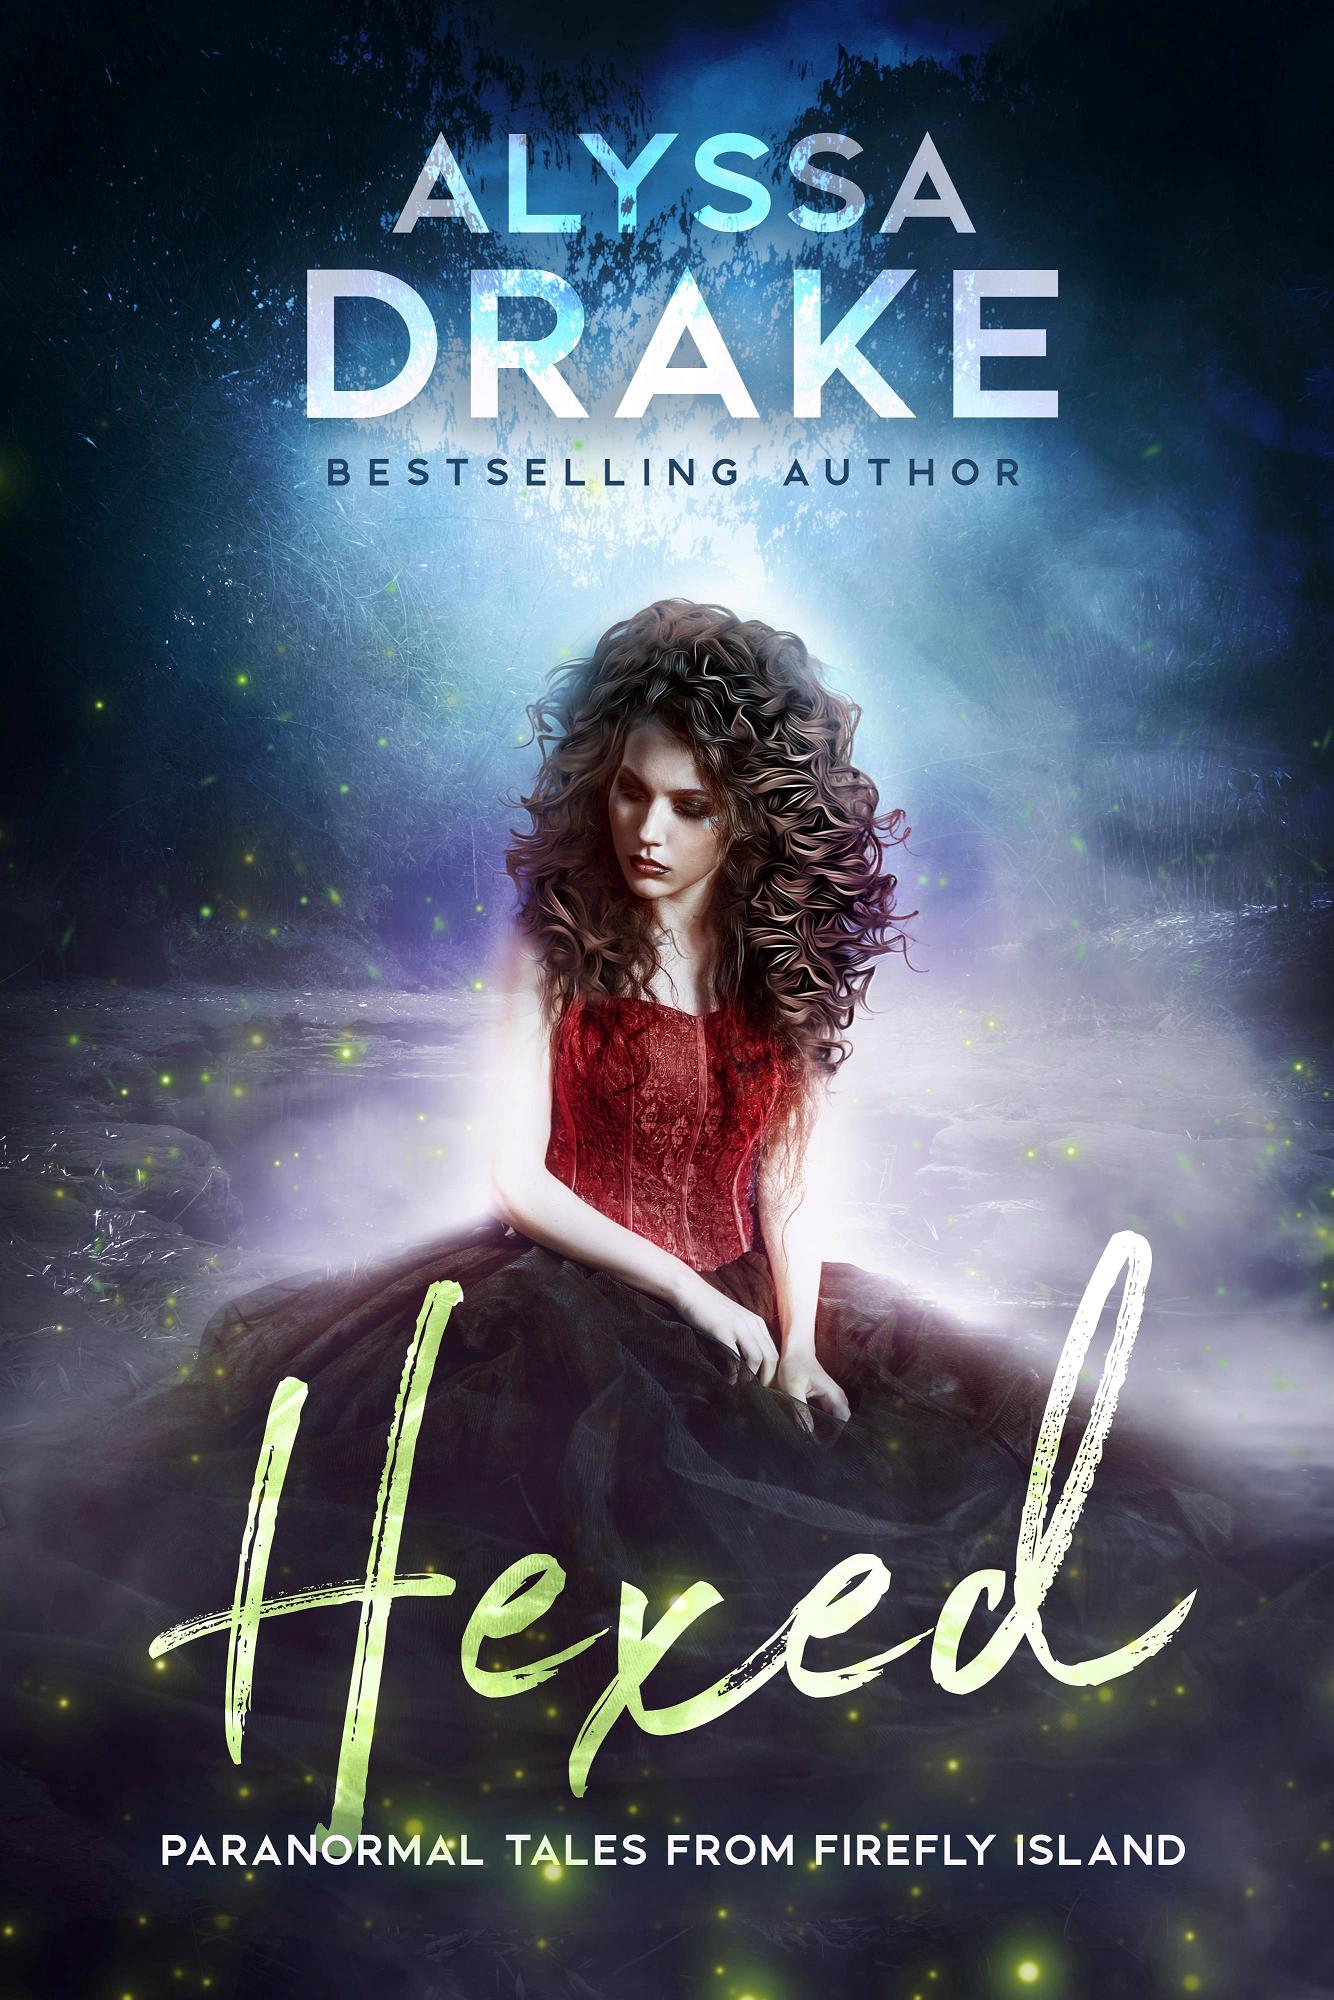 Get your free copy of Hexed by Alyssa Drake | Booksprout